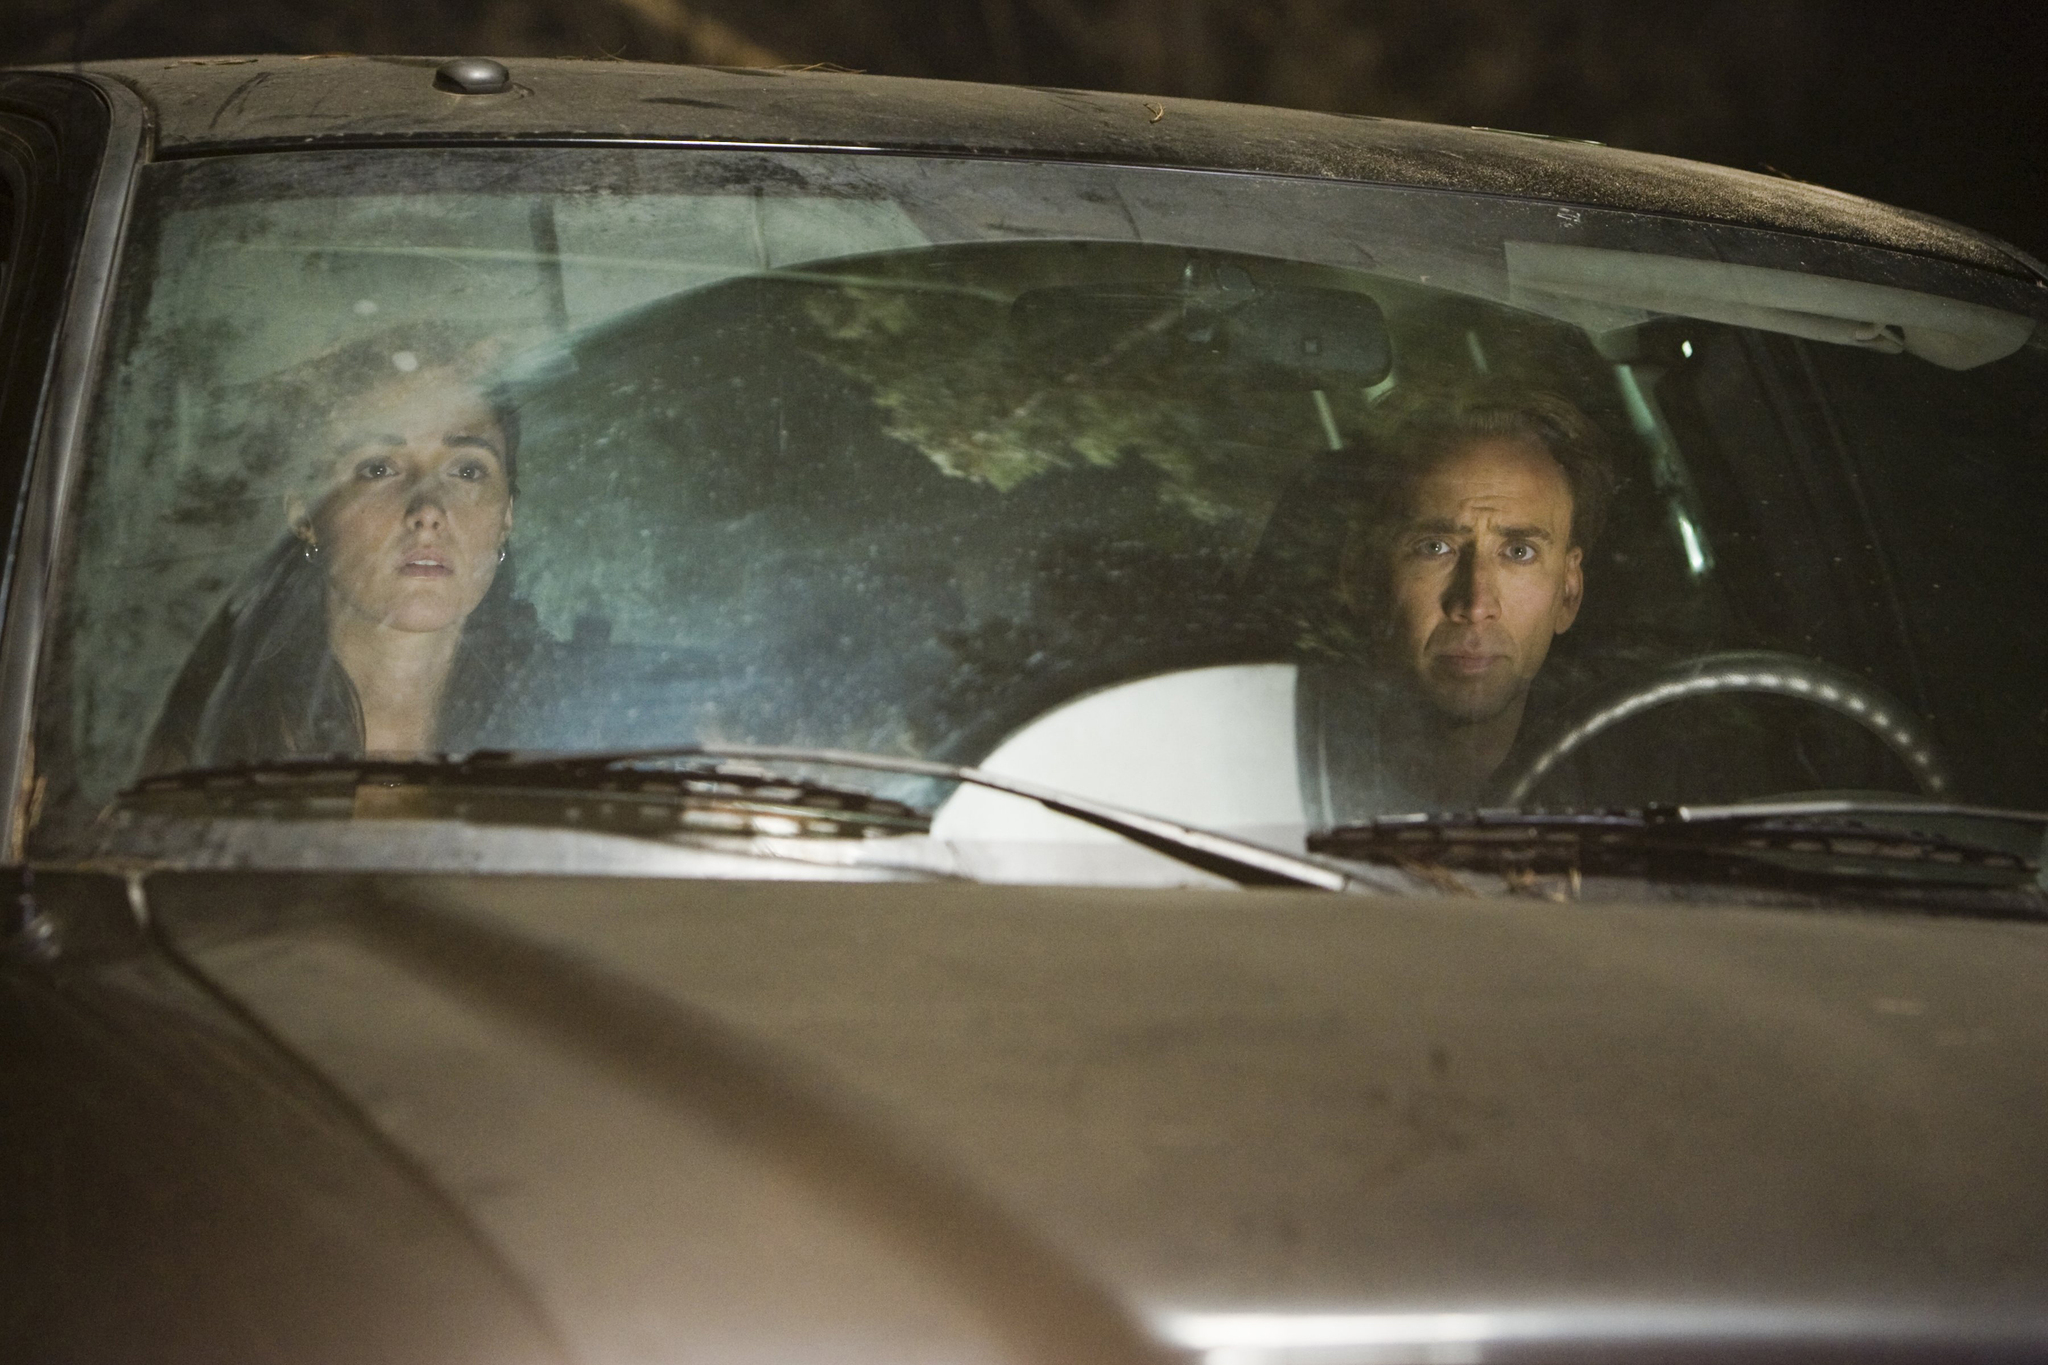 Still of Nicolas Cage and Rose Byrne in Suvokimas (2009)